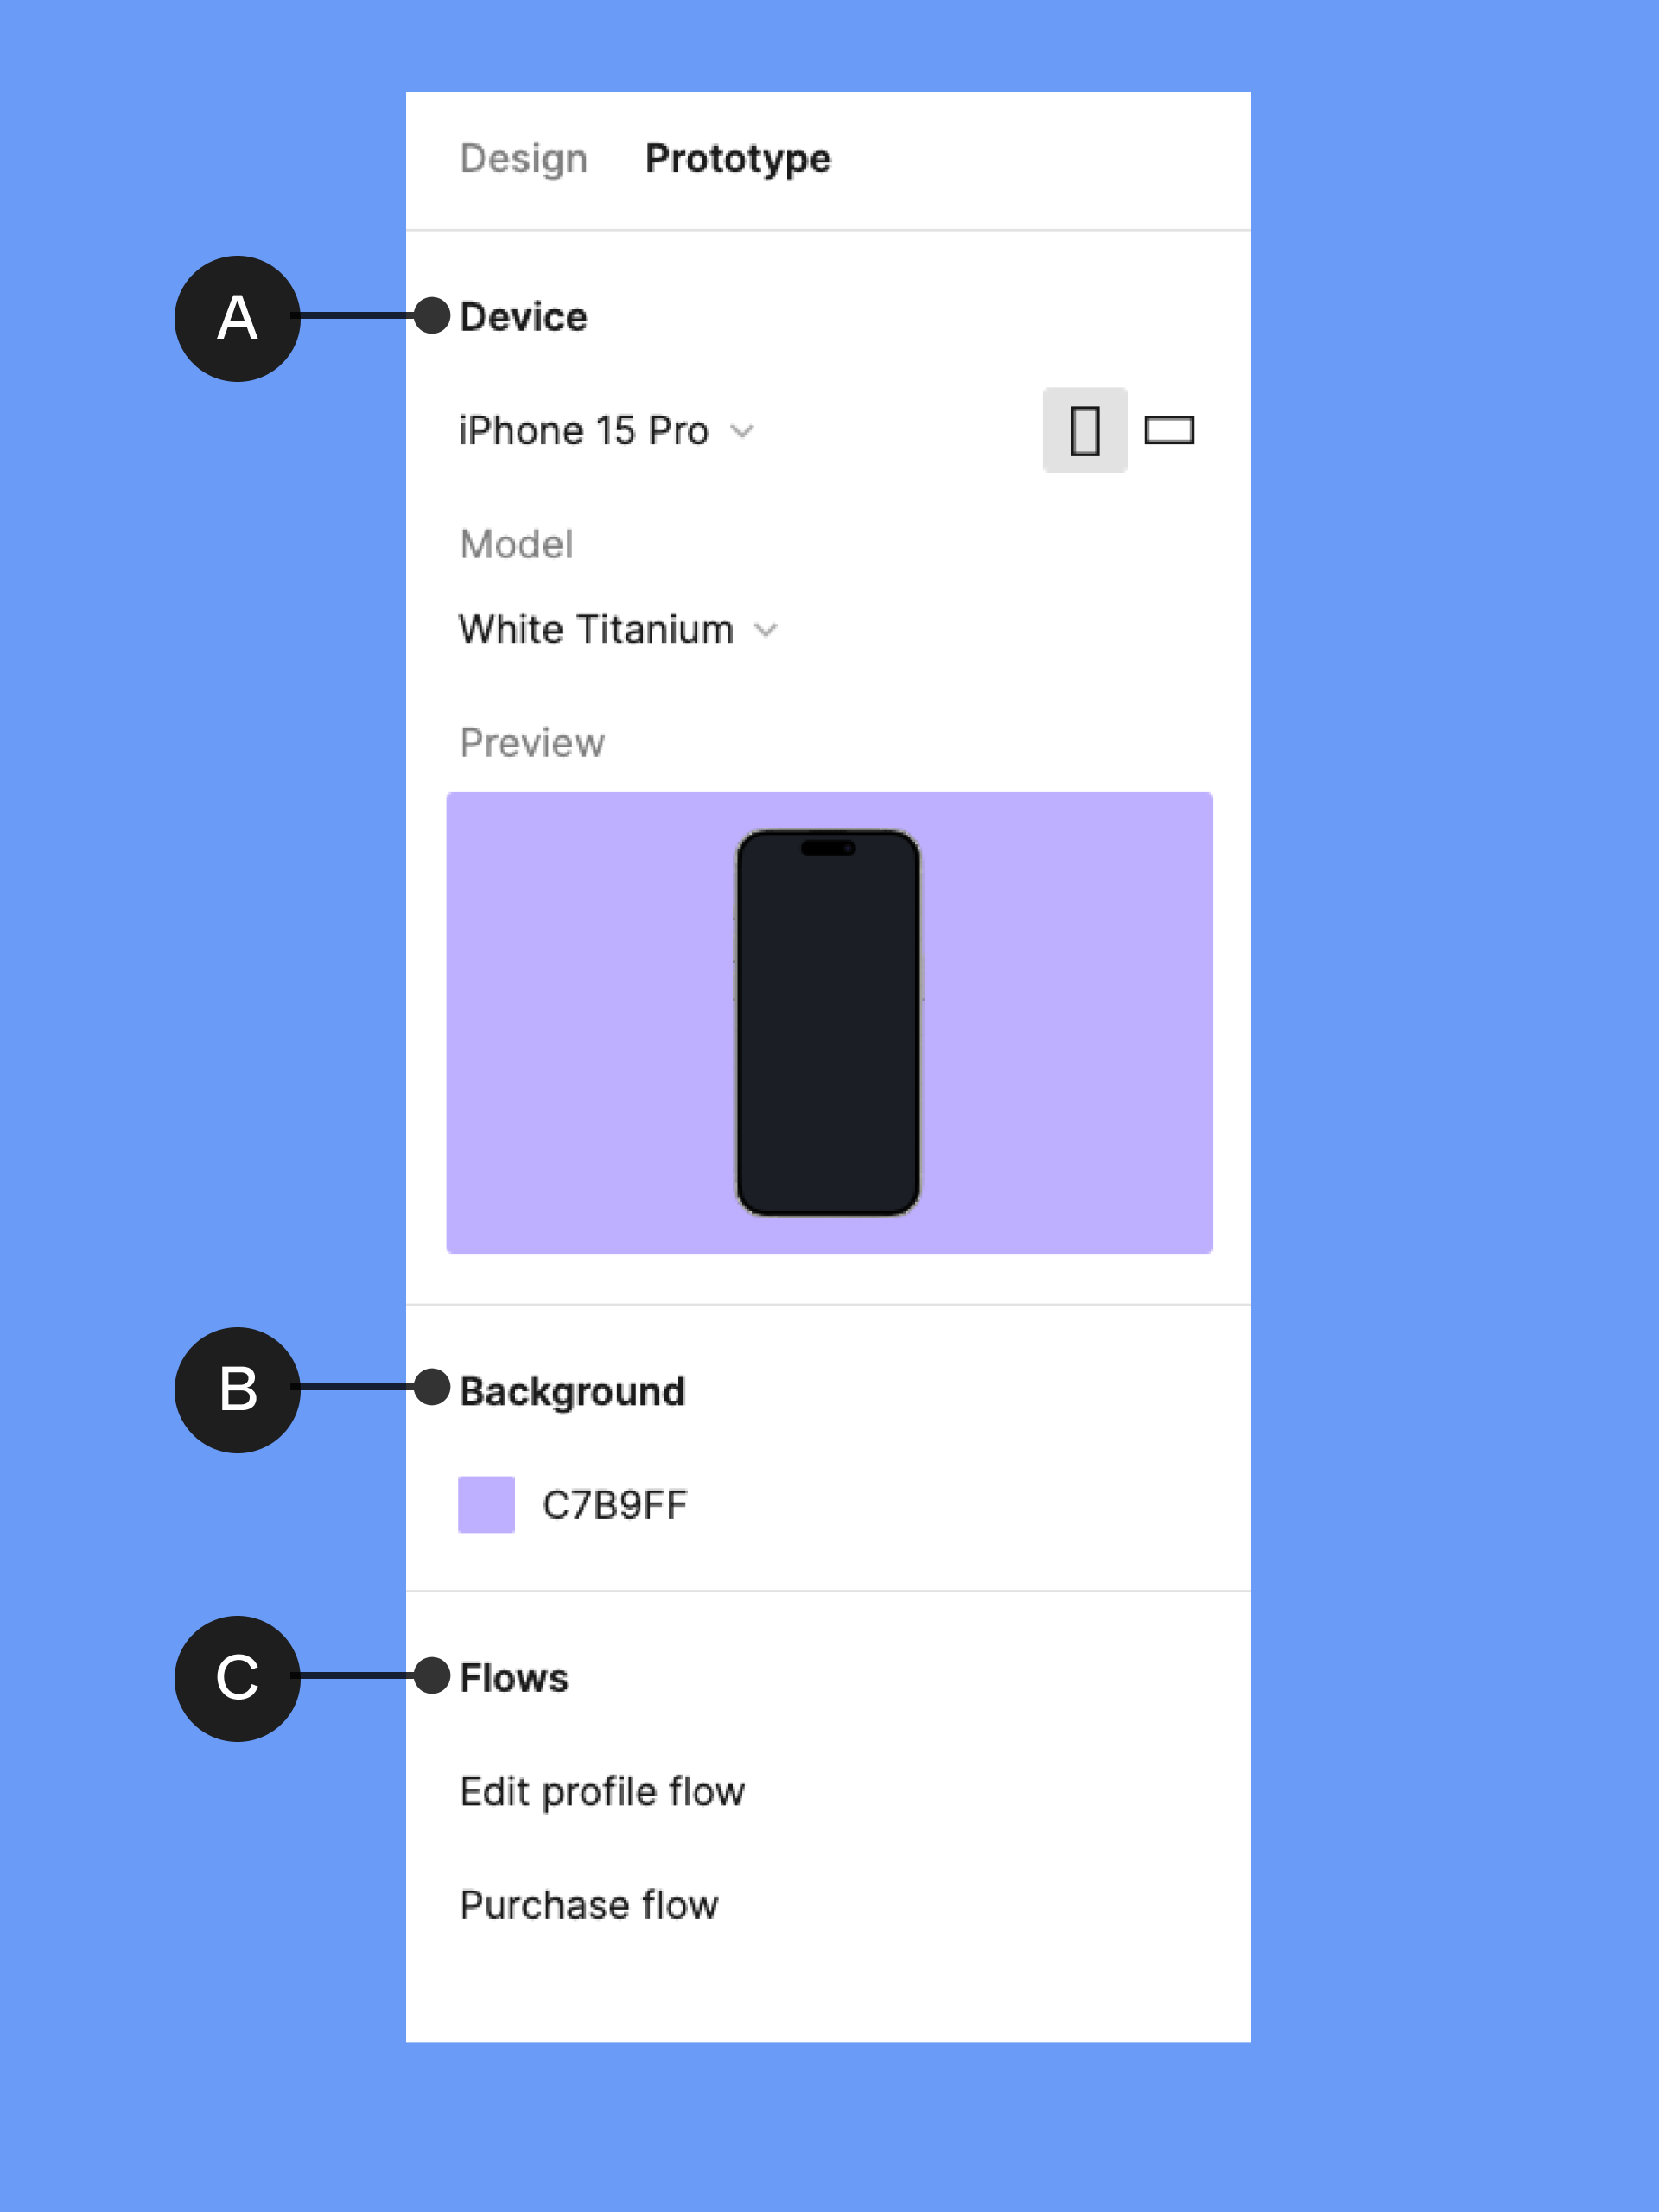 The Prototype tab shows settings for device, background, and flows.